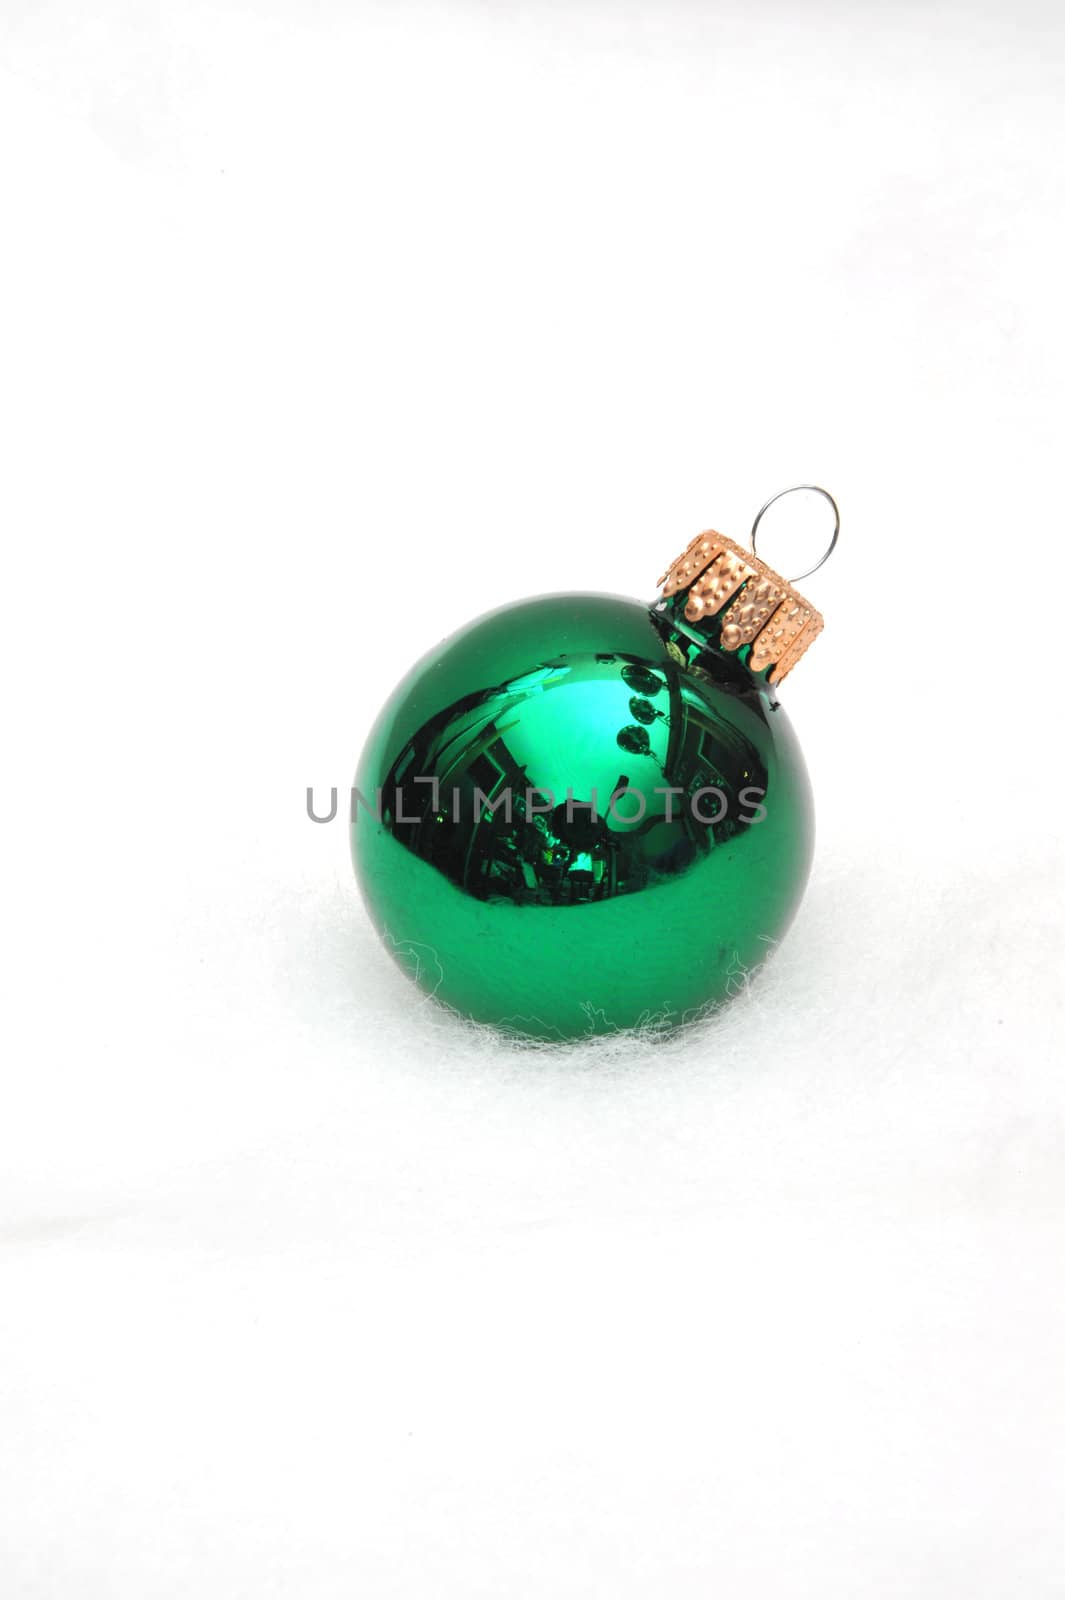 Singe green ornament on a light fuzzy background